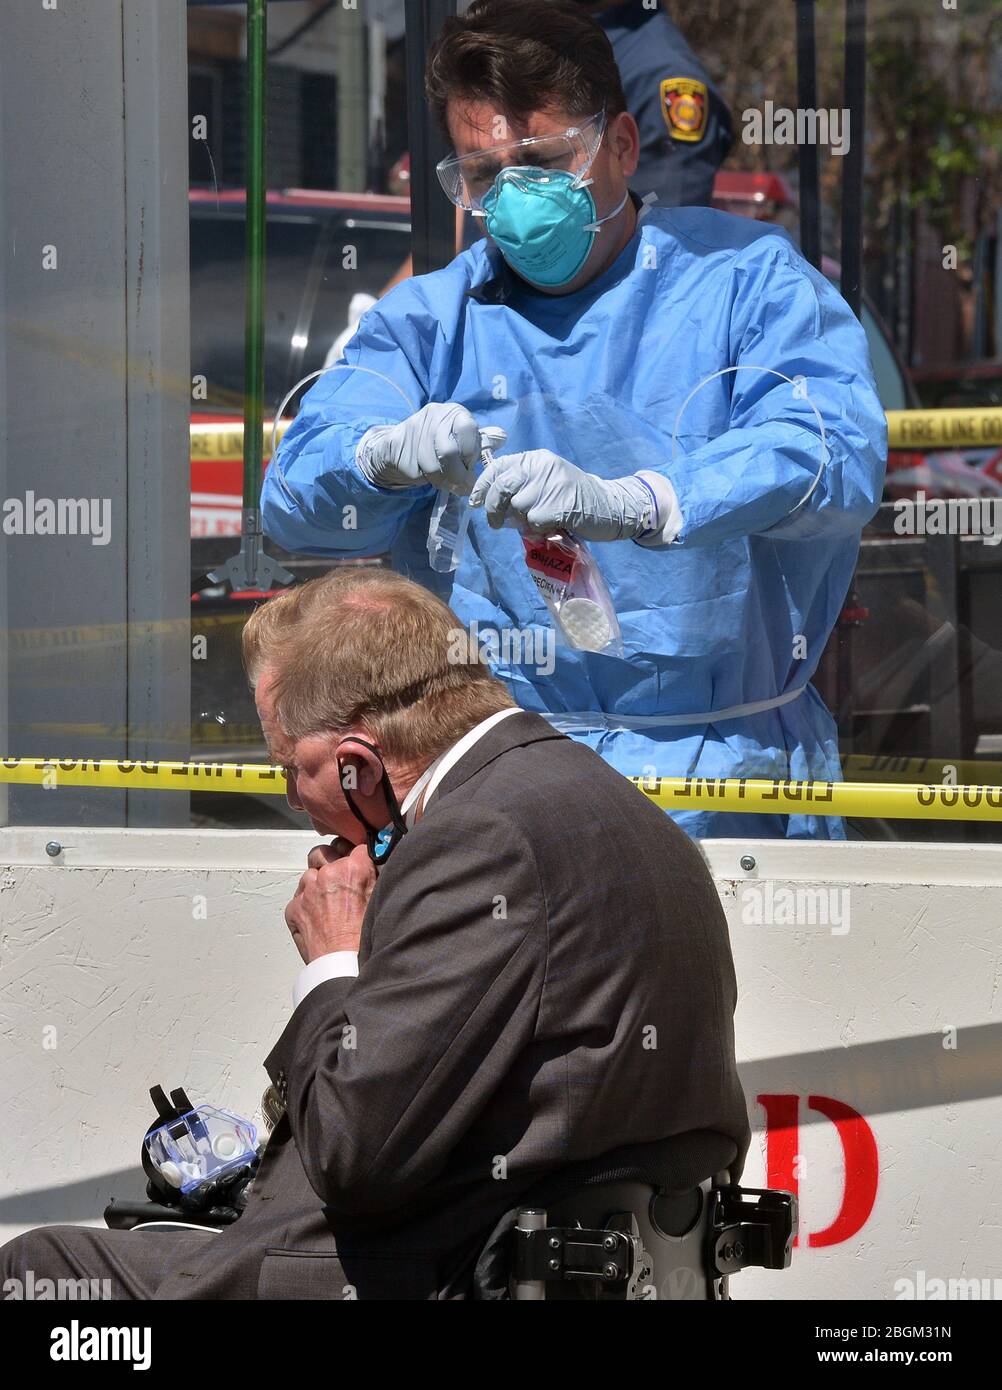 Union Rescue Mission CEO Rev. Andy Bales administers a COVID-19 self-testing kit at a LA Fire Department pop-up testing station, where workers in hazmat suits handed out testing swabs to the homeless from behind a protective window in the Skid Row section of Los Angeles on Tuesday, April 21, 2020. Forty-three more people have tested positive for the coronavirus at the Union Rescue Mission, Los Angeles' oldest and largest homeless shelter. The sudden spike in cases comes despite the extreme precautions the shelter has been taking to prevent such an outbreak. Photo by Jim Ruymen/UPI Stock Photo